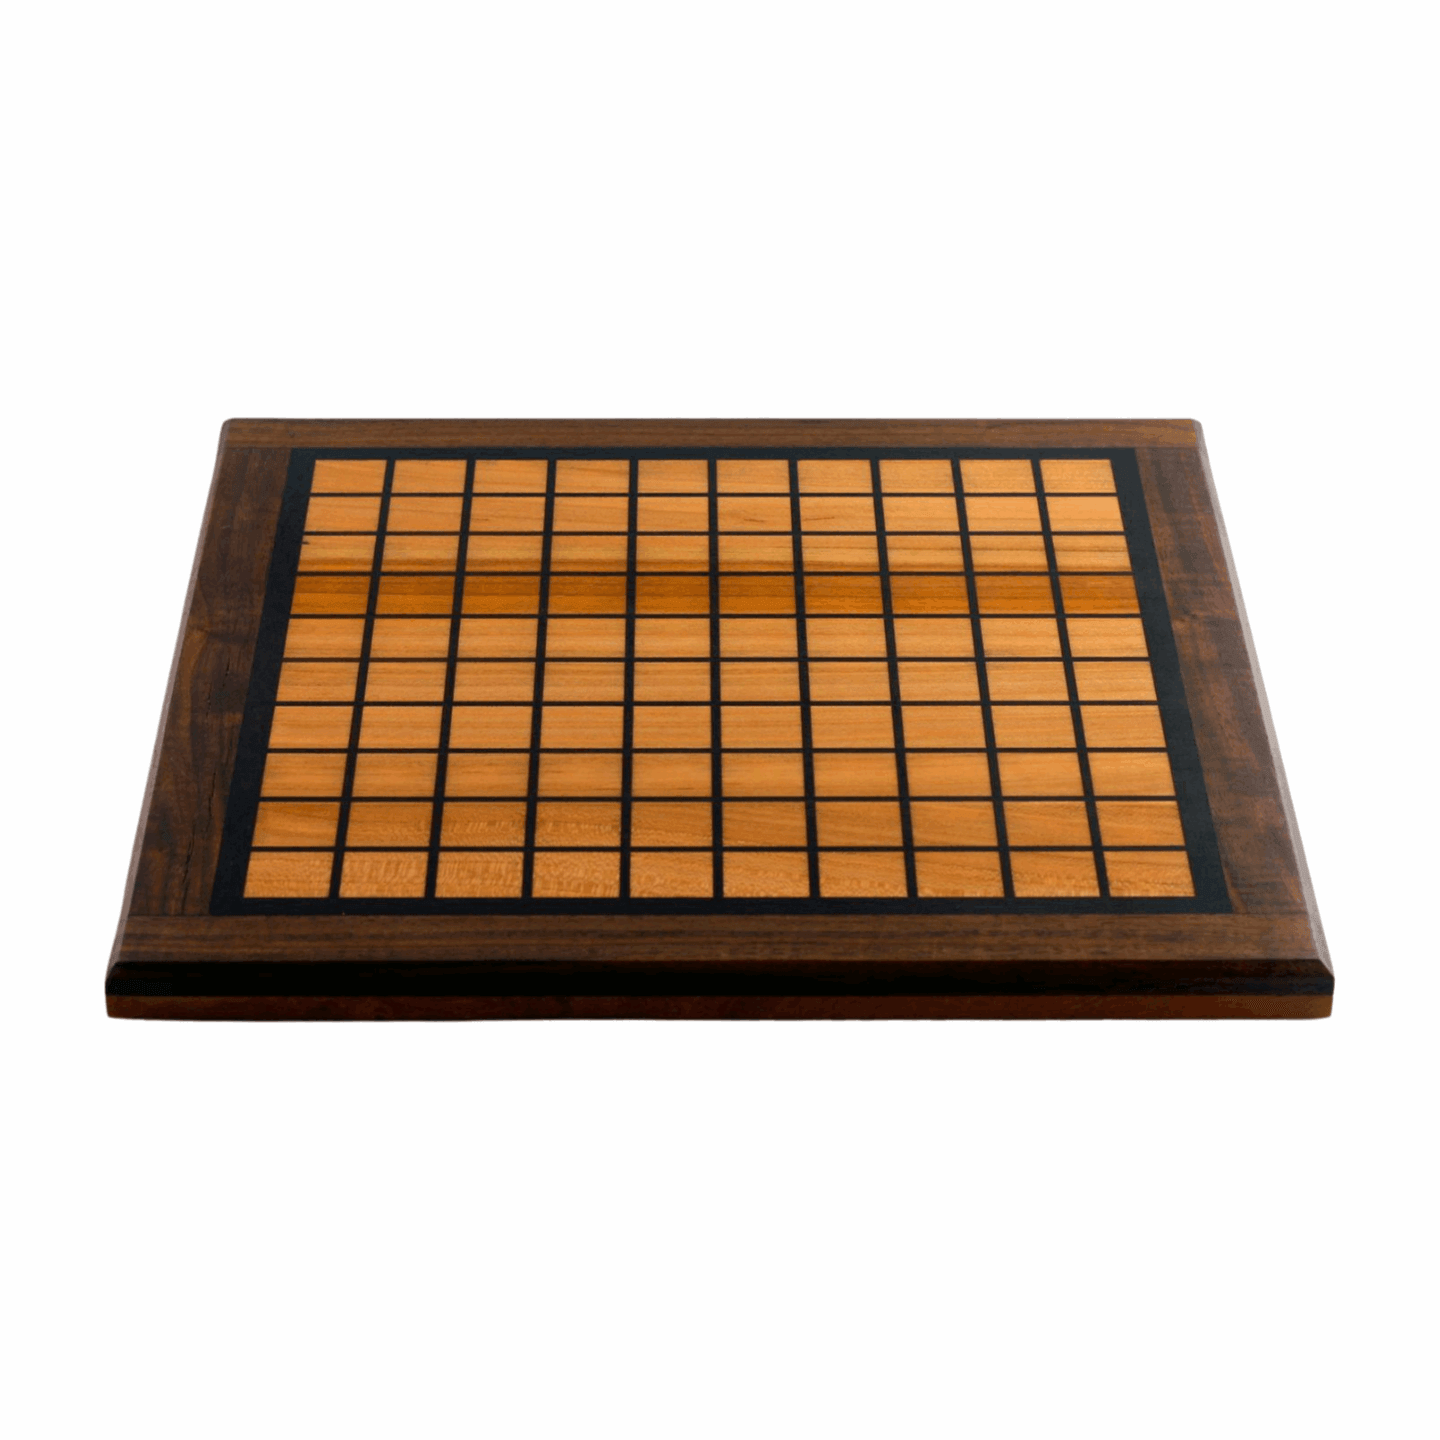 Wooden game board with epoxy grid